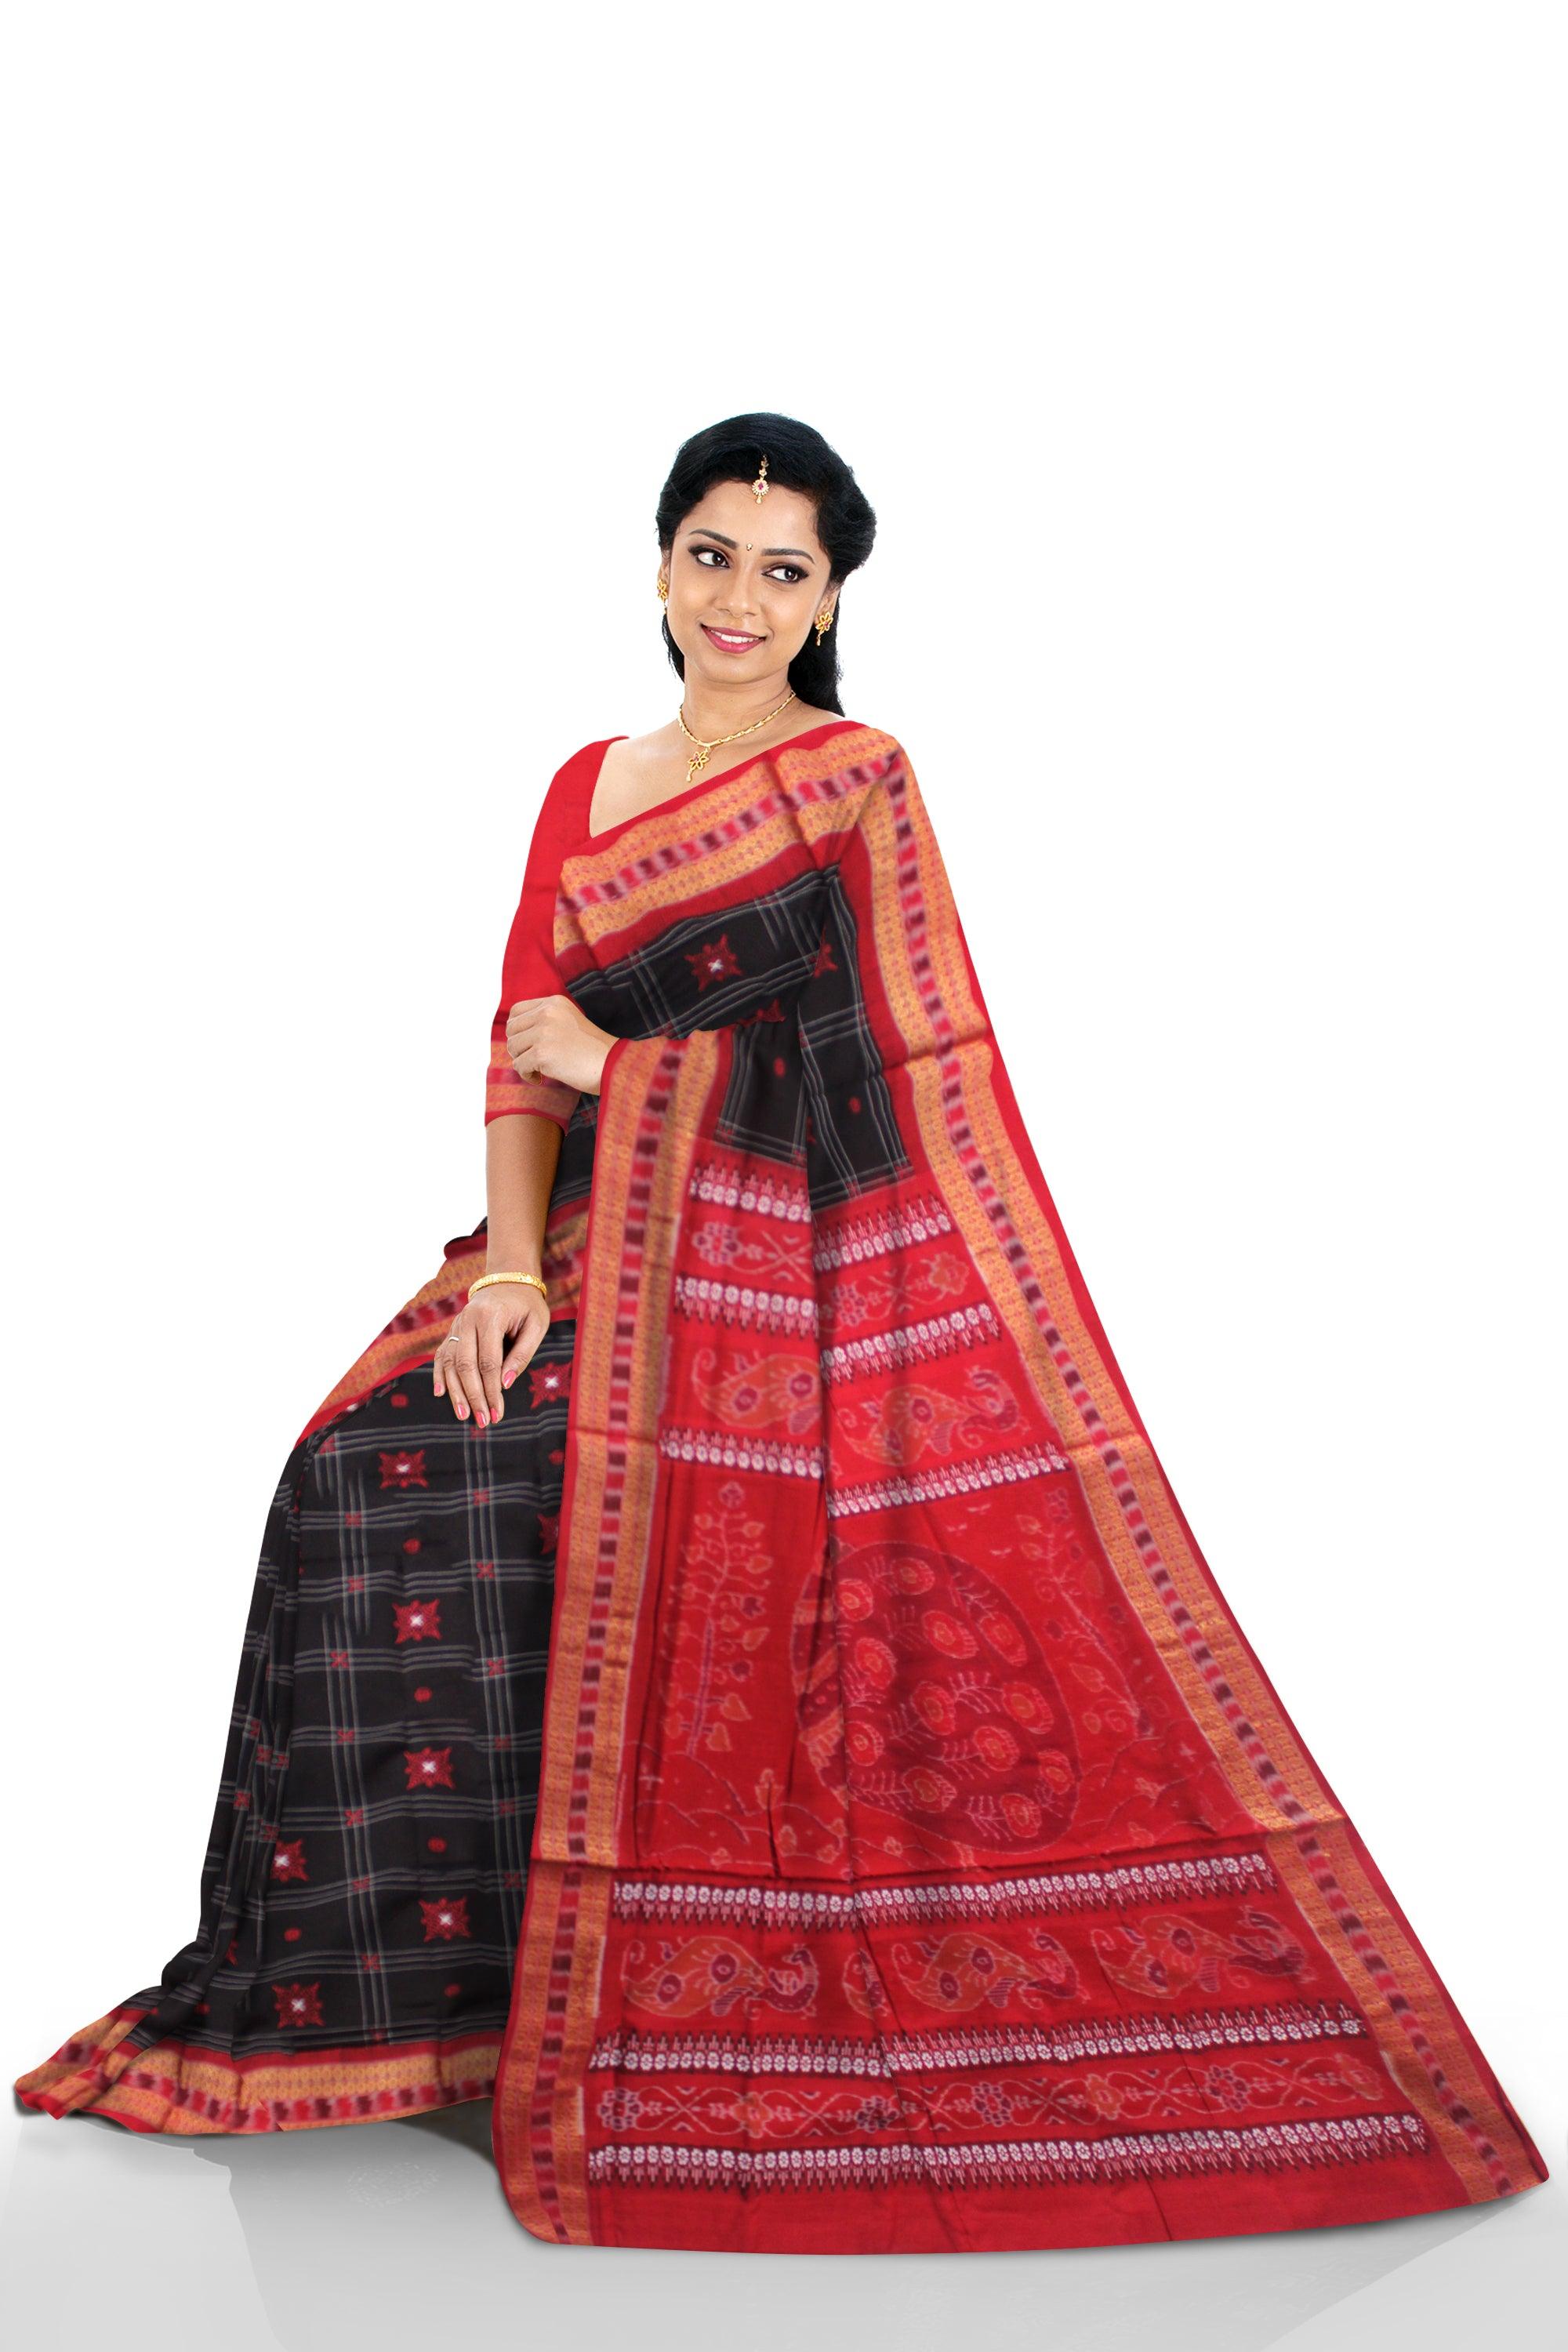 NEW DESIGN  BOMKEI PATTERN COTTON SAREE IN   MODERN BLACK AND RED  COLOR BASE, ATTACHED WITH  BLOUSE PIECE. - Koshali Arts & Crafts Enterprise